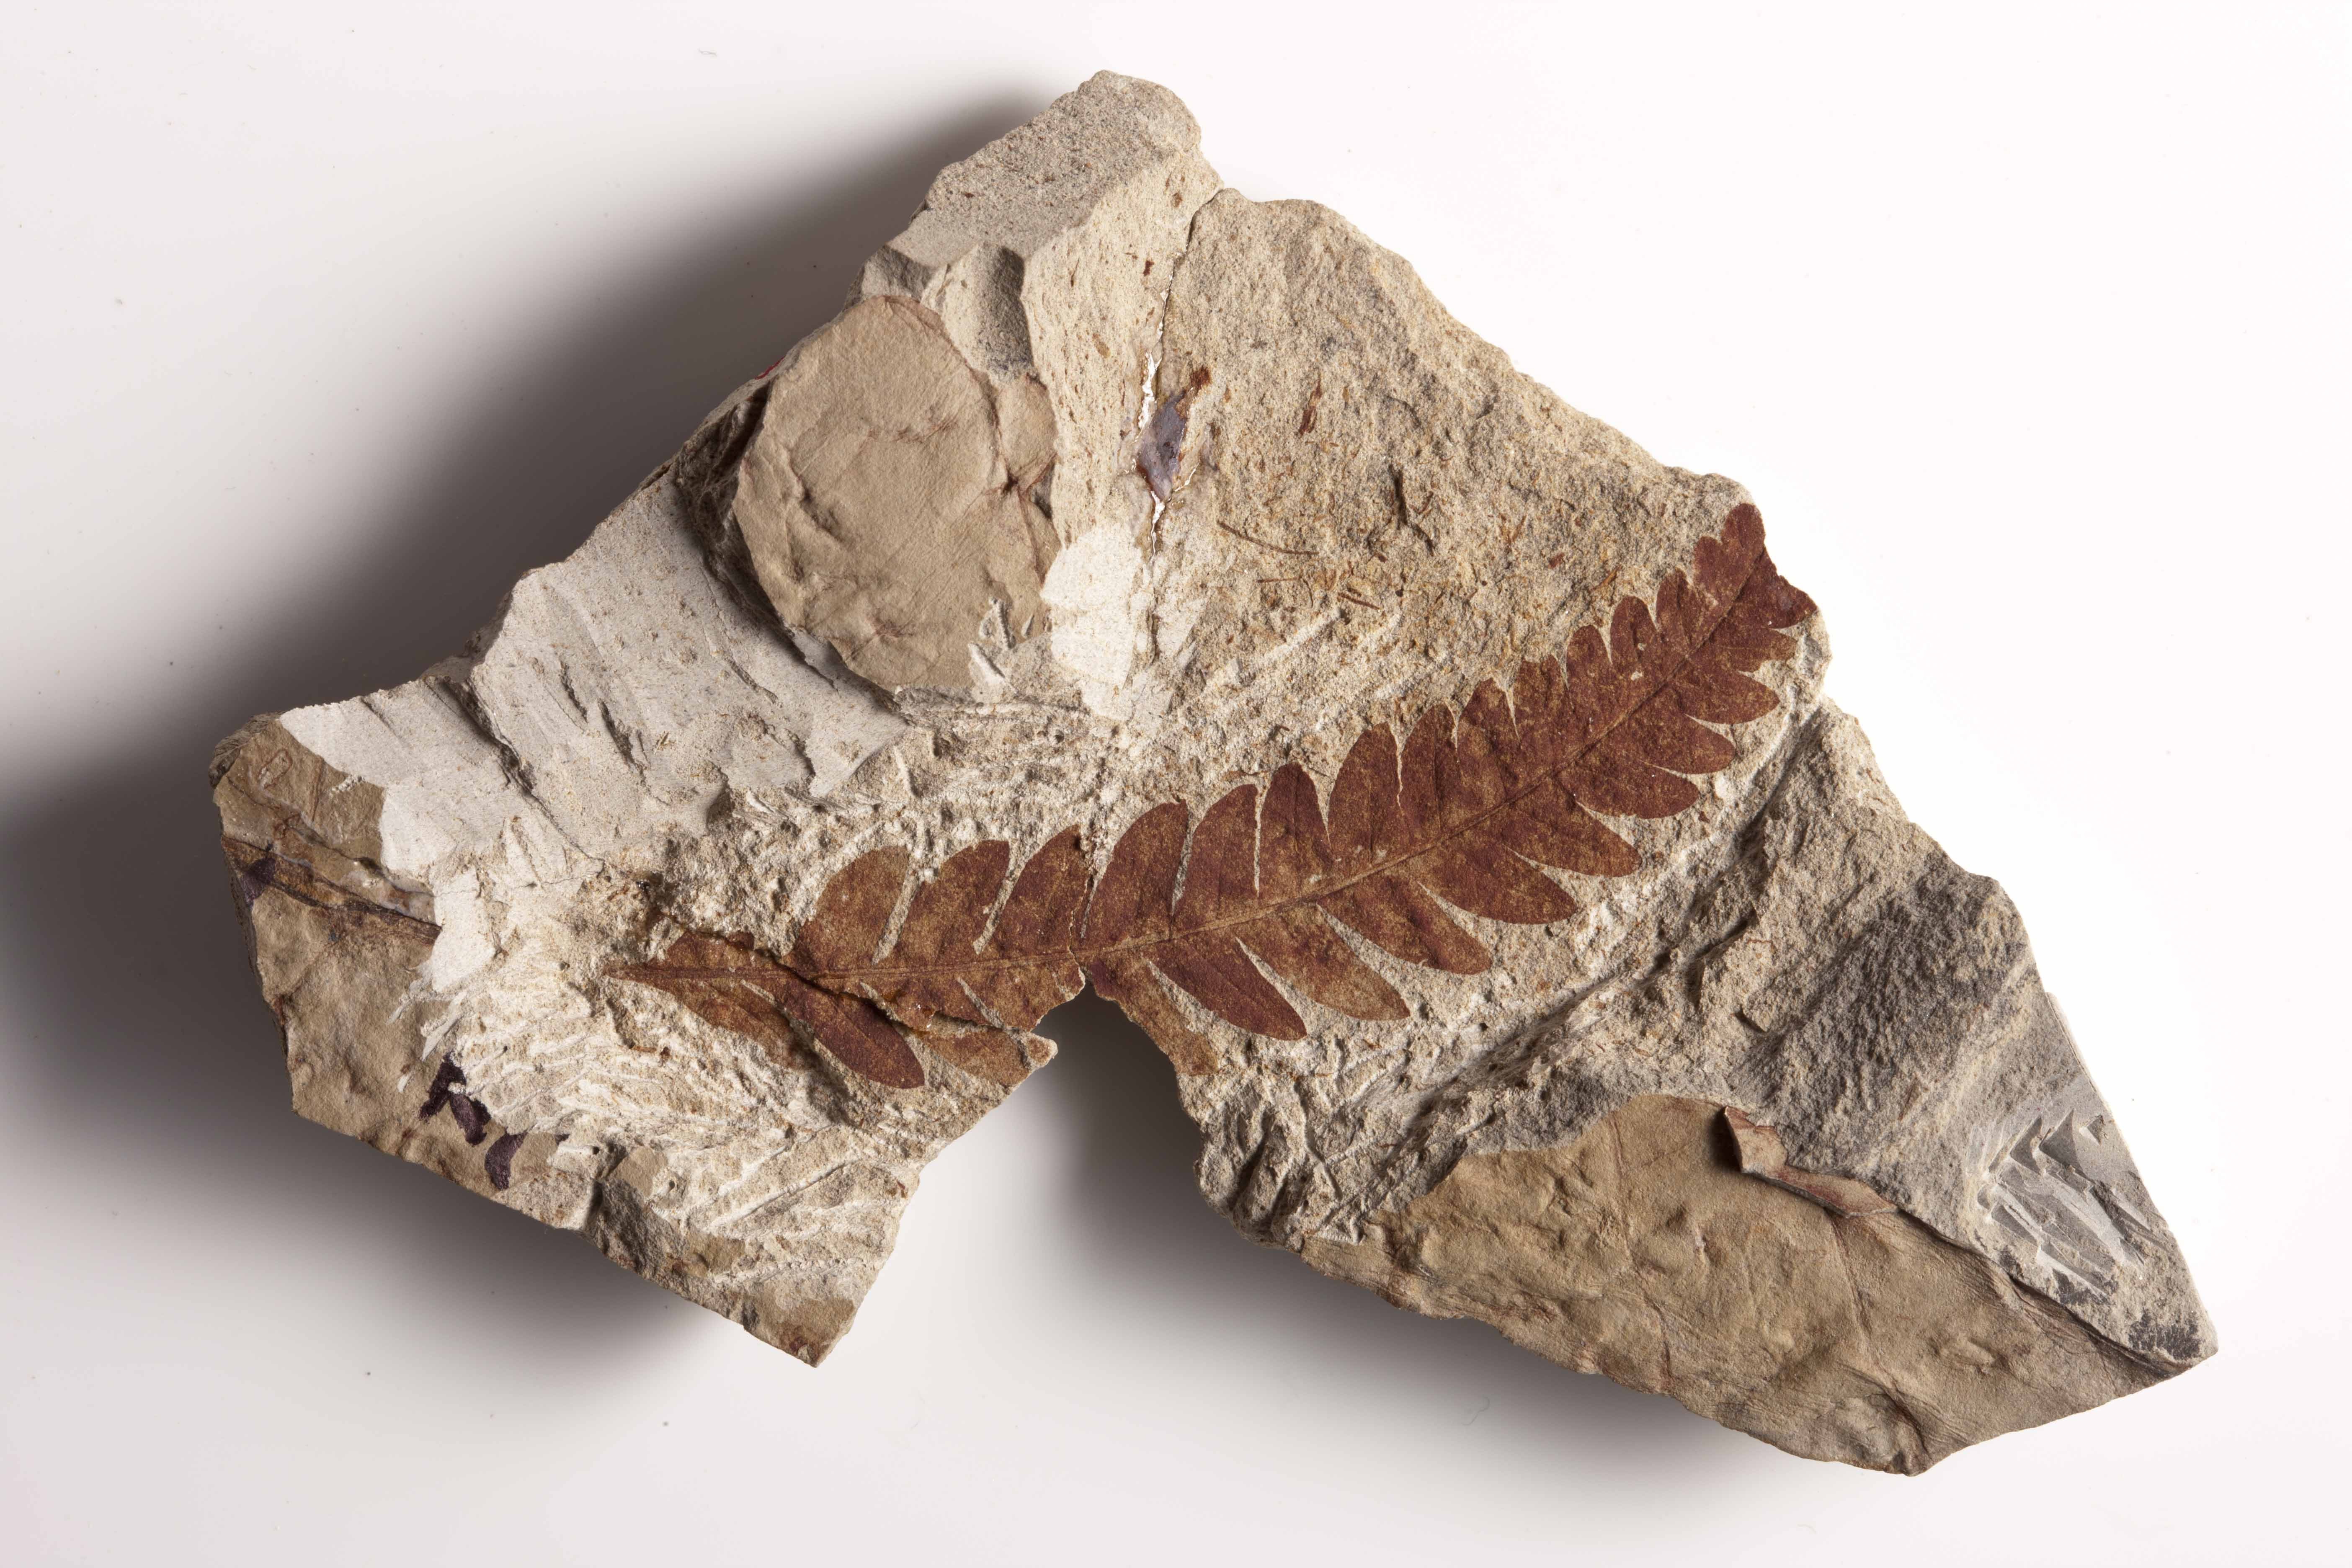 fossils-help-scientists-build-a-picture-of-the-past-and-present